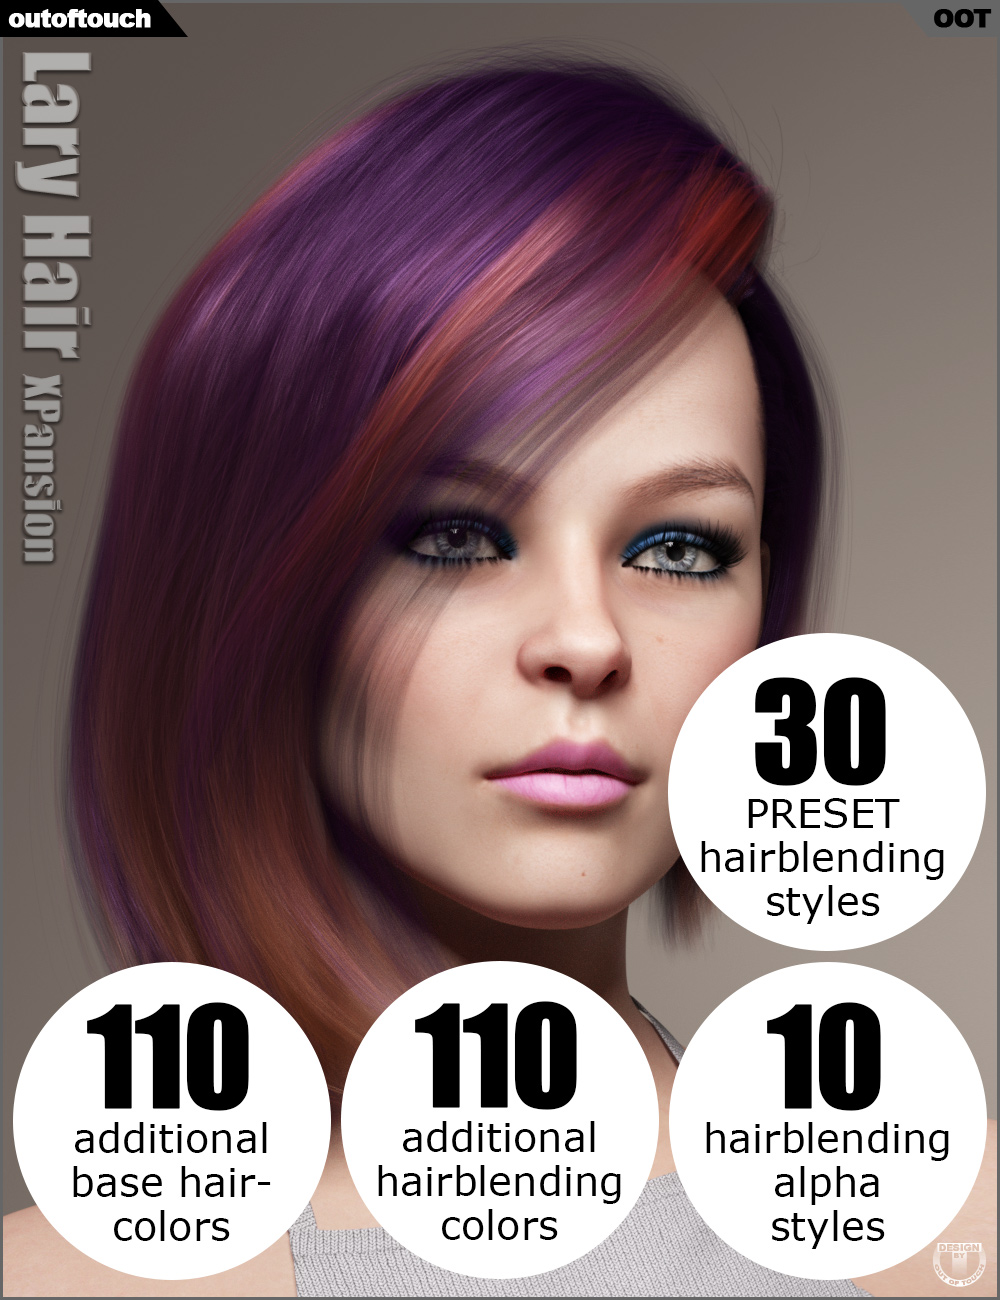 OOT Hairblending 2.0 Texture XPansion for Lary Hair by: outoftouch, 3D Models by Daz 3D